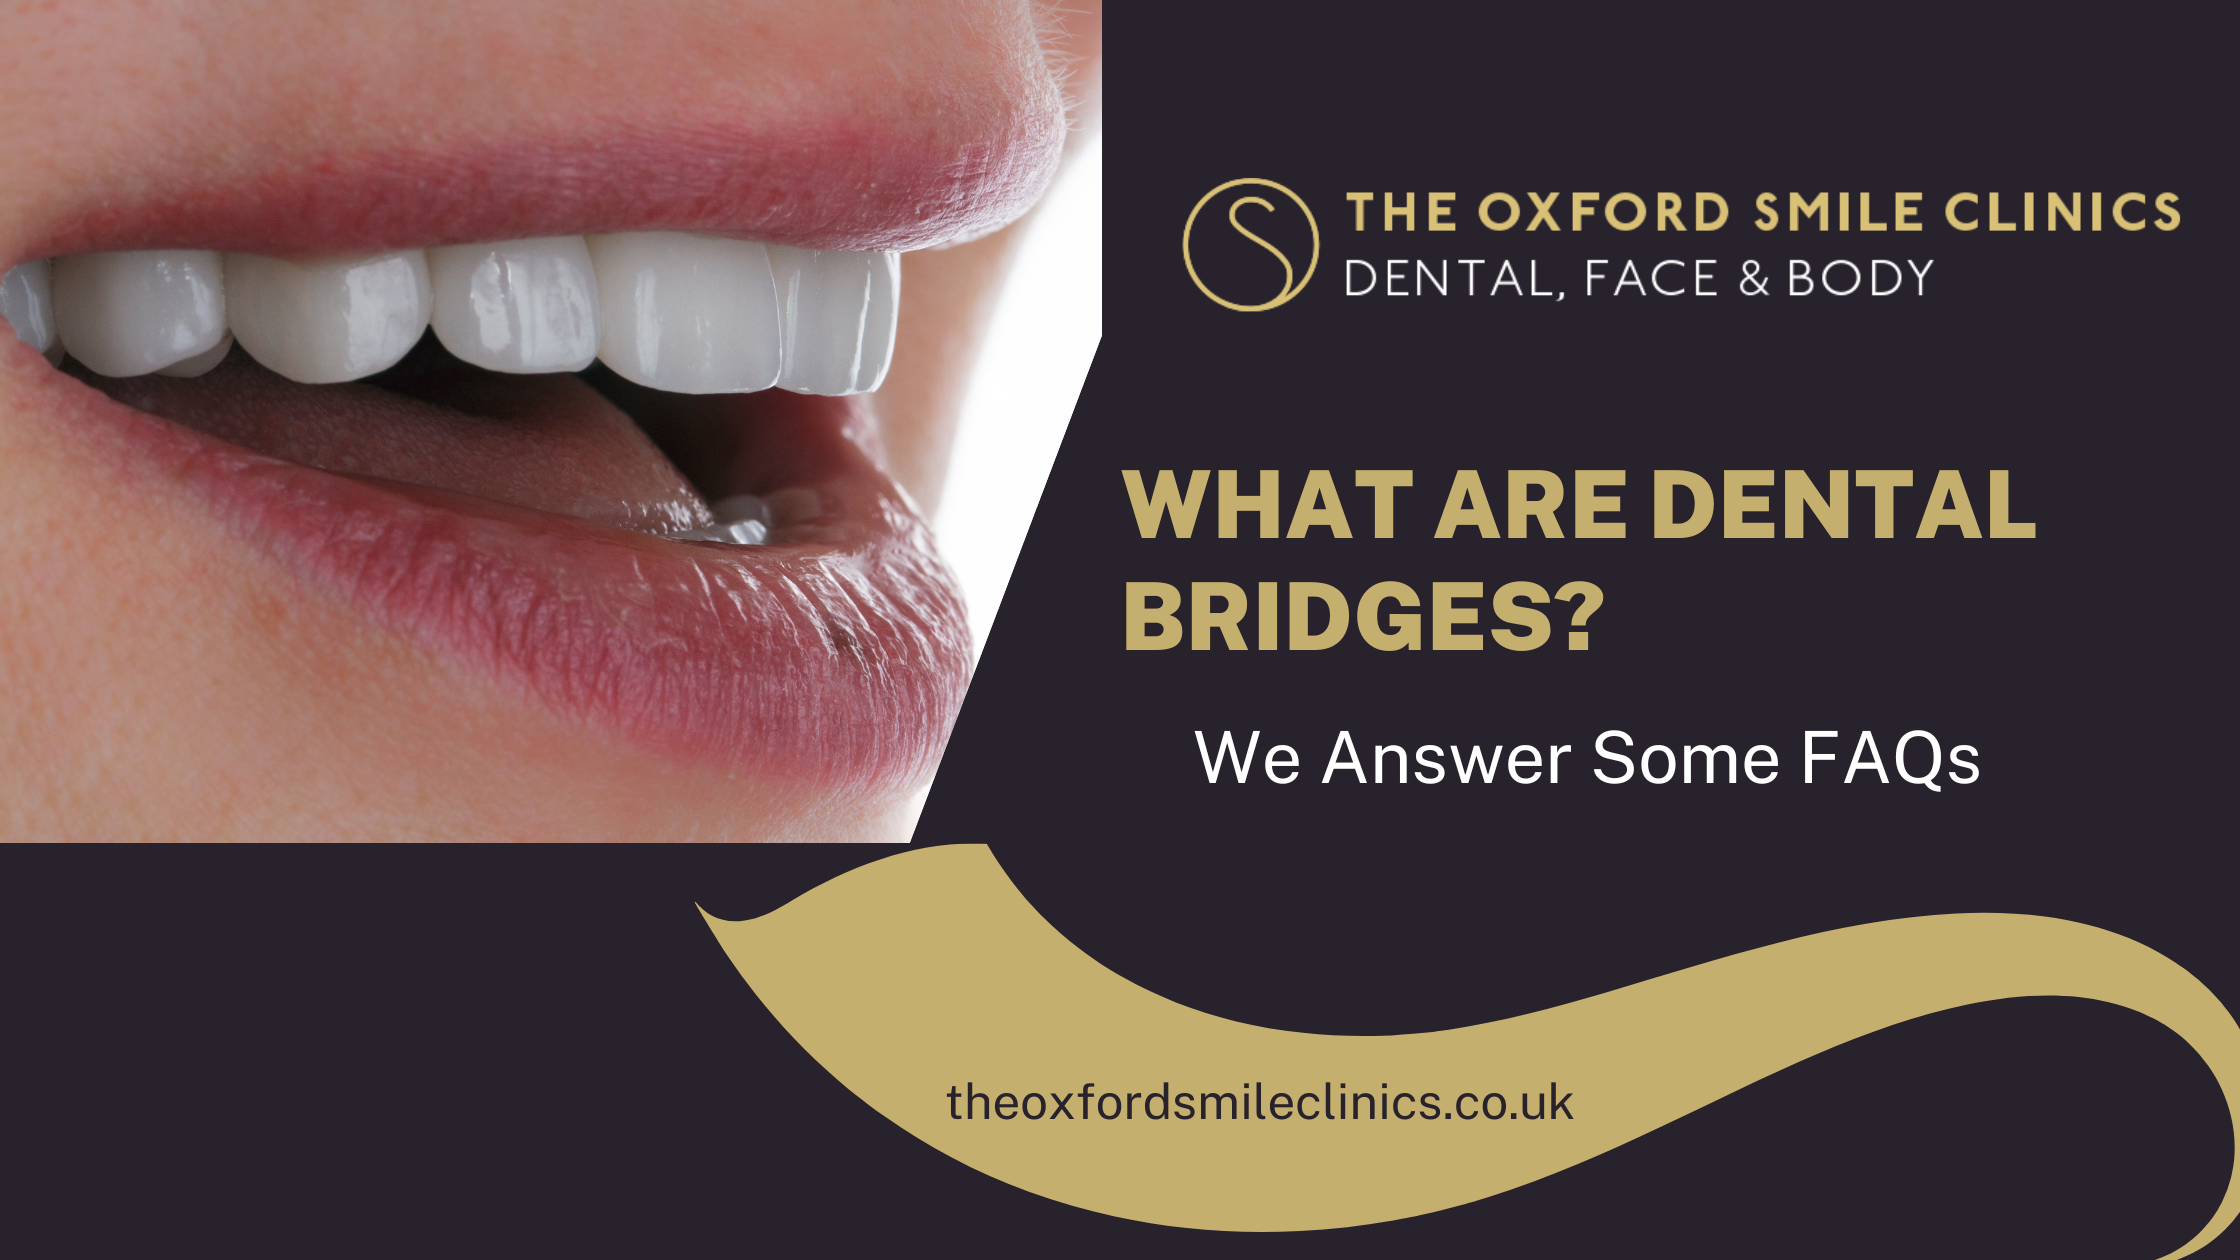 When we talk about missing teeth, the first thing that comes to mind is removable dentures. But have you ever wondered if there are any tooth replacement options available other than dentures? Of course, there is! Have you heard of dental bridges? If not, don’t worry; this blog contains all the information you need to decide whether a dental bridge is the right option to replace missing teeth. So, read through the entire blog to get all your questions about dental bridges answered. What Are Dental Bridges? According to the American College of Prosthodontists, a bridge is a fixed prosthesis used for replacing one or more missing adjacent natural teeth. Unlike a removable denture that can be removed and inserted at the patient’s will, a bridge takes support from the healthy natural teeth on either side and remains fixed to them. Therefore, a bridge can only be used for tooth replacement in patients who still have a few natural teeth left in their mouth to support the prosthesis. What Are The Different Types of Dental Bridges? According to the Cleveland Clinic, there are four different types of dental bridges based on their design: Traditional Bridges - These bridges take support from healthy teeth on both sides. Crowns are attached to both sides of the bridge that sit on the prepared natural teeth and prevent the prosthesis from moving unnecessarily. The artificial teeth used for replacing the missing teeth in a bridge are called pontics. These bridges are used when healthy natural teeth are available on both sides of the missing teeth gap. Cantilever Bridges - As the name suggests, these bridges take support from the natural teeth only on one side. These bridges are used when natural supporting teeth are only available on one side of the missing teeth gap. Maryland Bridge - This bridge has a different design than the traditional and cantilever bridge. Instead of taking support from the natural teeth through crowns (abutments), these bridges are attached to the supporting teeth using a metal mesh. This mesh is bonded to the lingual (tongue-facing) surface of the teeth. These bridges are typically used for replacing the front missing teeth where heavy biting forces are not expected. Implant-supported Bridge - This bridge has a similar design to the conventional tooth-supported bridges. However, instead of natural teeth, they use dental implants for their support. What Are The Benefits of Dental Bridges? Dental implants offer several advantages over conventional removable dentures: Support - dental bridges remain fixed to the natural teeth. As a result, they provide superior support and chewing efficiency than removable dentures. Aesthetics - Dental bridges use aesthetically pleasing tooth-coloured ceramic pontics and abutments that help restore one’s smile and facial aesthetics. Durability - dental bridges tend to last considerably longer than removable dentures, which require frequent repair or replacement. How Do Dental Bridges Work? Dental bridges have the same design as architectural bridges. Like a road bridge is used for “bridging” a gap between two places, a dental bridge is used for bridging a gap created by one or more missing teeth. A bridge consists of abutments at both ends, which are crowns bonded to the supporting natural teeth. In between the abutments are pontics, the artificial teeth which will fill the gap. So, the abutments rest on natural teeth or implants and provide support for the pontics used for tooth replacement. What Is The Difference Between a Dental Crown And a Bridge? The primary difference between a crown and a bridge is that a crown is used for “restoring” a damaged tooth, while a bridge is used for replacing one or more missing teeth. You can consider a tooth bride as a prosthesis consisting of multiple crowns joined together, two abutments on both sides for support and the pontics in between them for tooth replacement. The number of pontics or crowns needed for a bridge depends on the number of missing teeth. What Is a Temporary Dental Bridge? The fabrication process of a dental bridge is typically completed between 2-3 sittings. During this time, patients prefer to have a temporary solution for their missing teeth. A temporary bridge is an appliance that is used for transiently replacing the missing teeth, while a permanent dental bridge is being fabricated in the dental laboratory. However, temporary bridges are not as strong and durable as the permanent ones. Therefore, they should not be used for eating and are only for aesthetic purposes. Once a patient’s bridges are received from the lab, their dentist will remove the temporary ones and bond the permanent ones in their place. How Long Does a Dental Bridge Typically Last? A bridge’s service life depends on various factors, such as the type of bridge, the quality of the material used for its fabrication, how well they are looked after by the patient, and the dentist’s skill. So, naturally, a traditional bridge will be considerably longer-lasting than a cantilever or Maryland bridge. Similarly, a bridge would last longer if its looked after carefully through optimal oral hygiene maintenance and by preventing its overloading. Typically, a tooth bridge can last up to ten years provided it is looked after well. If you live in Didcot and are considering a dental bridge for your missing teeth, you should consider Oxford Smile Clinics. Why? Because this practice has the best dental team in town and offers the highest-quality general and specialist dental services to its patients. So, request an initial consulation today and let us take care of your entire family’s dental health.